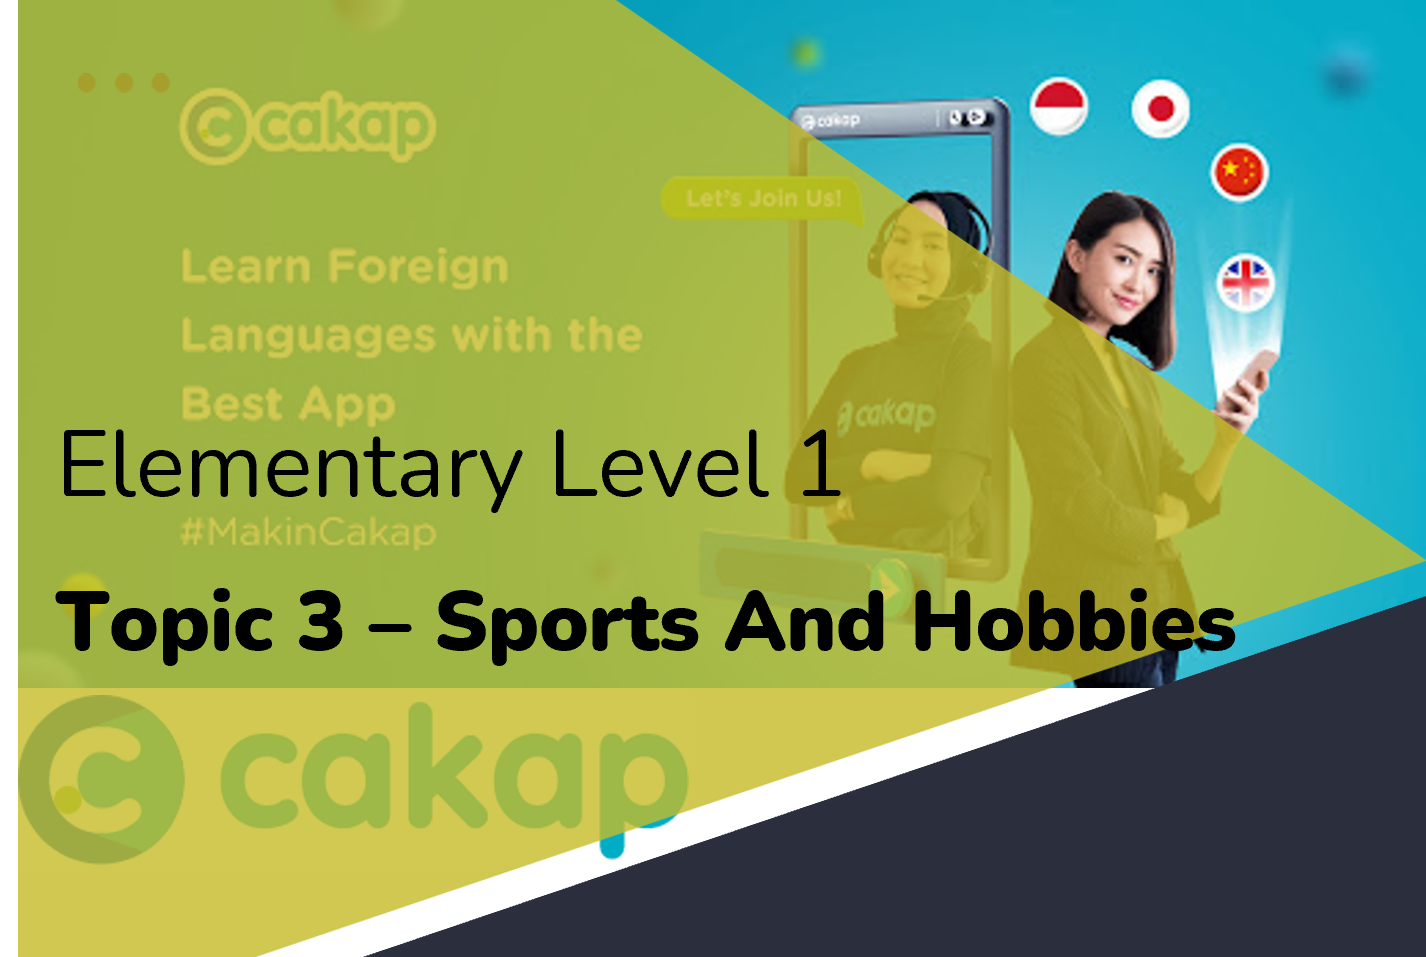 Elementary 1: Topic 3 - Sports And Hobbies